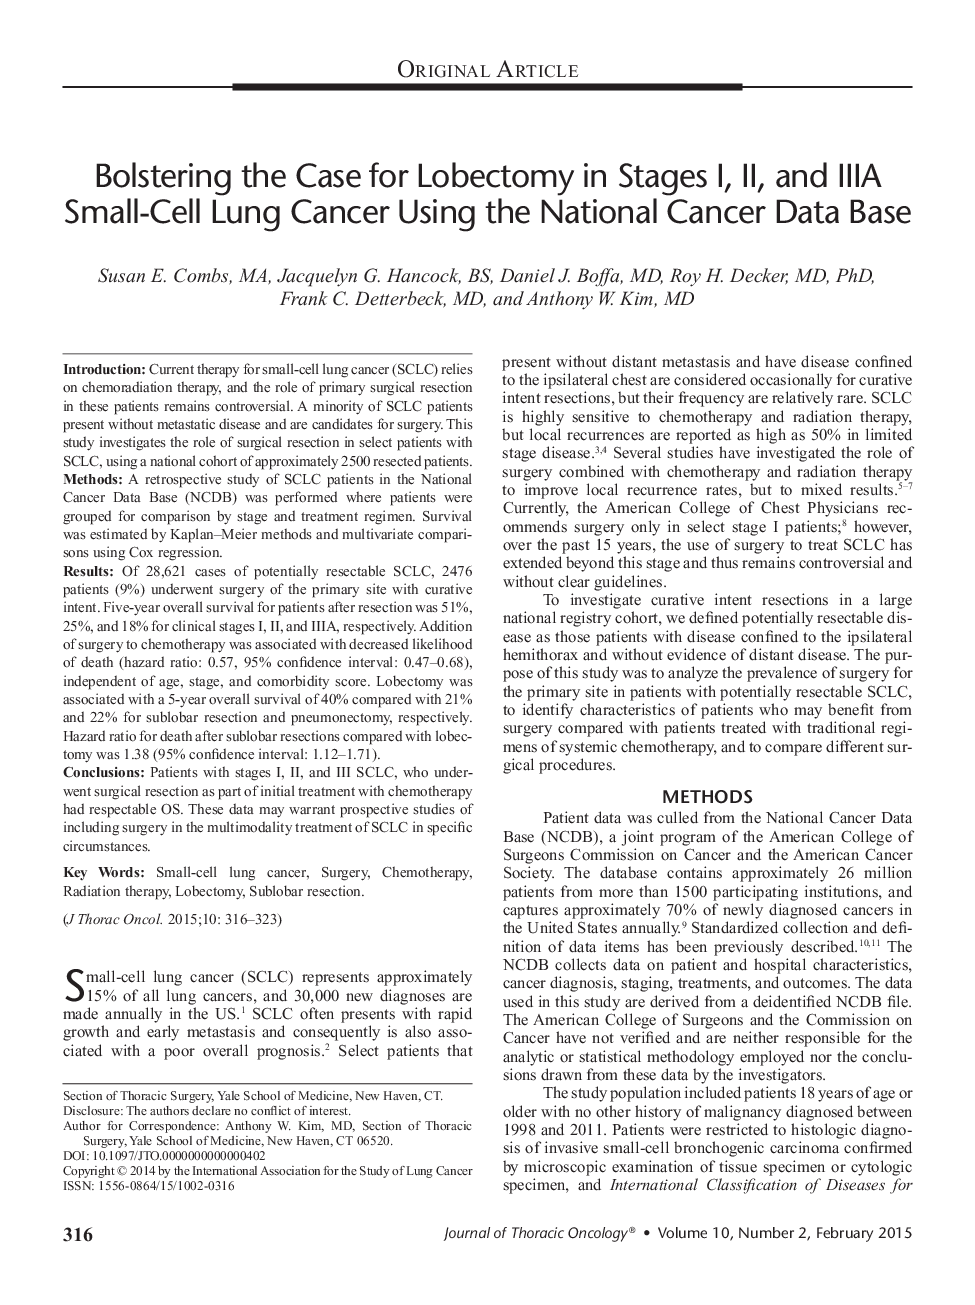 Bolstering the Case for Lobectomy in Stages I, II, and IIIA Small-Cell Lung Cancer Using the National Cancer Data Base